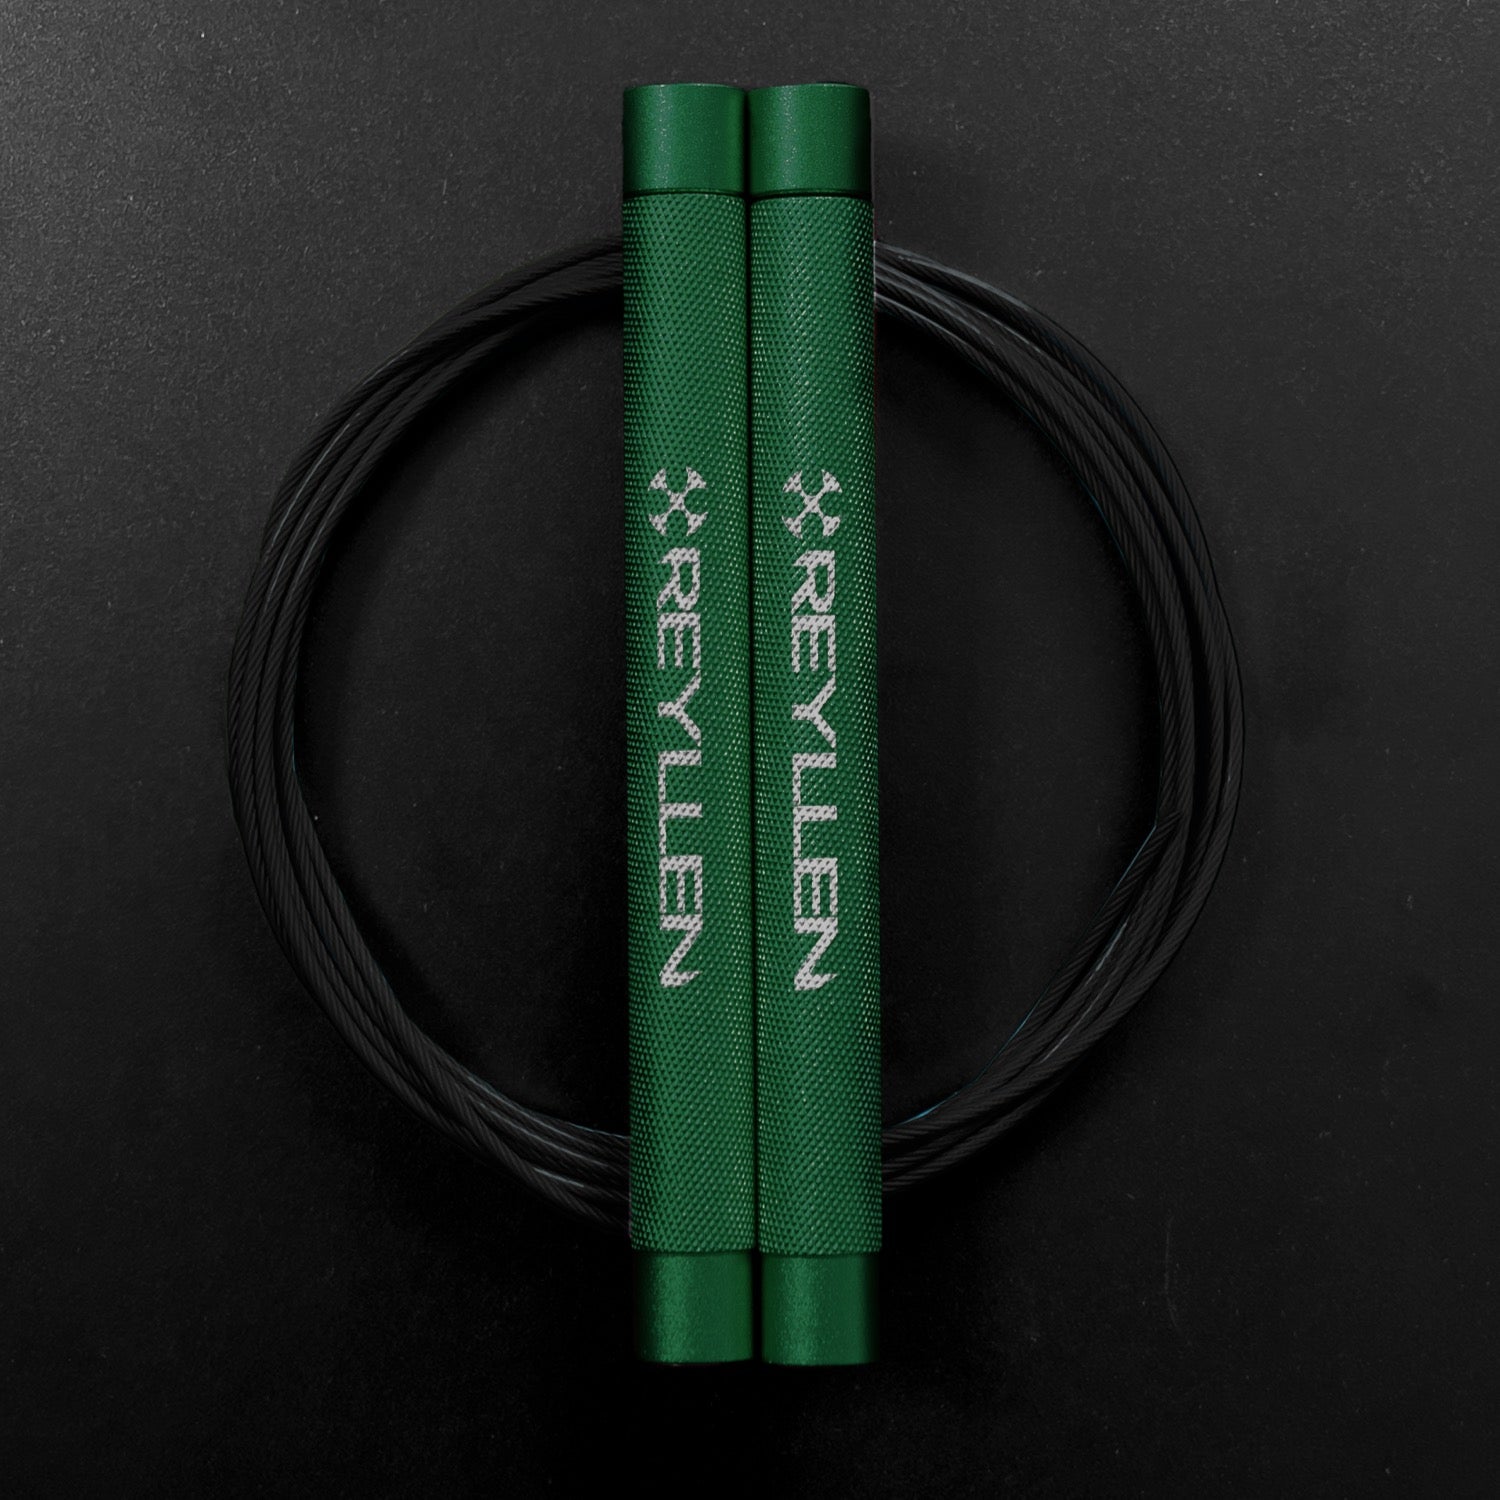 Reyllen Flare Mx Speed Skipping Jump Rope - Aluminium Handles - green with black nylon coated cable